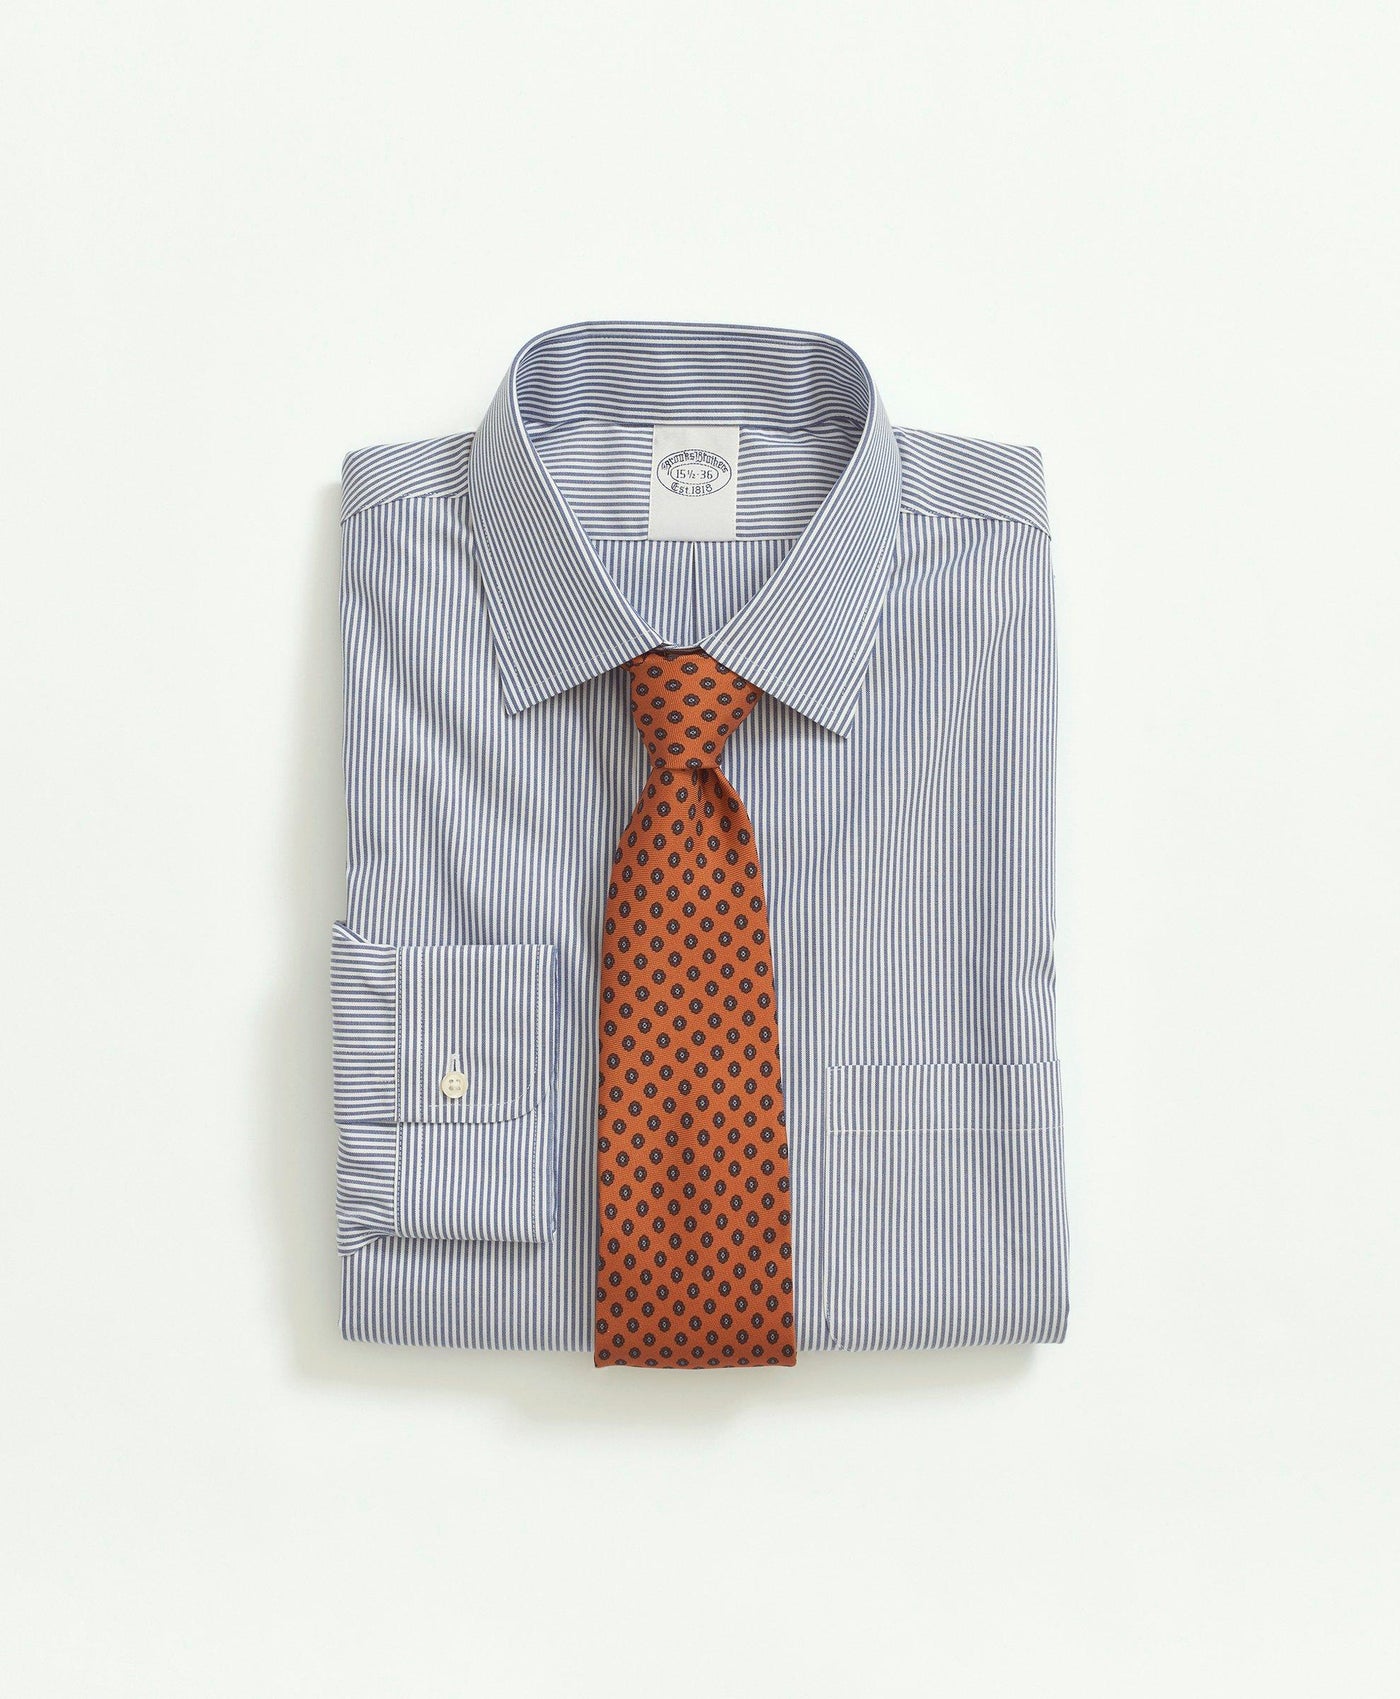 Stretch Regular-Fit Dress Shirt, Non-Iron Pinpoint Ainsley Collar Candy Stripe - Brooks Brothers Canada